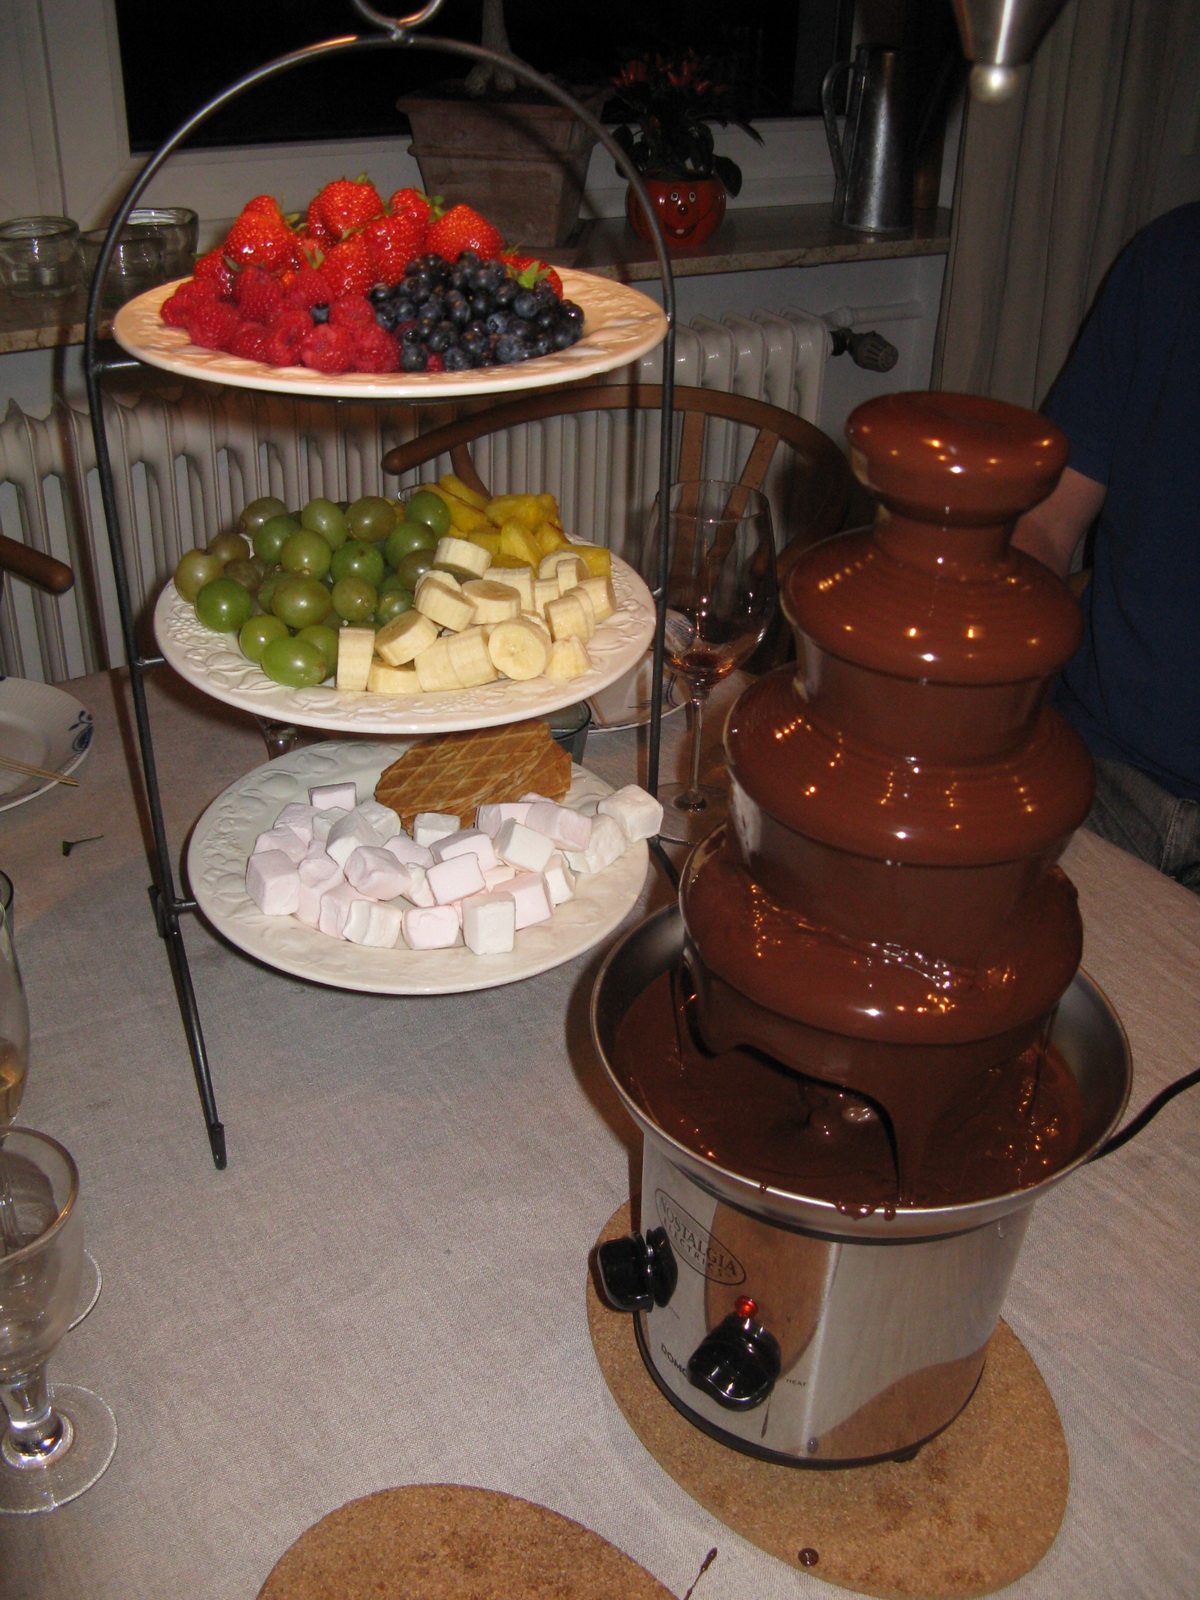 raspberries, blueberries and stawberries and chocolate fountain